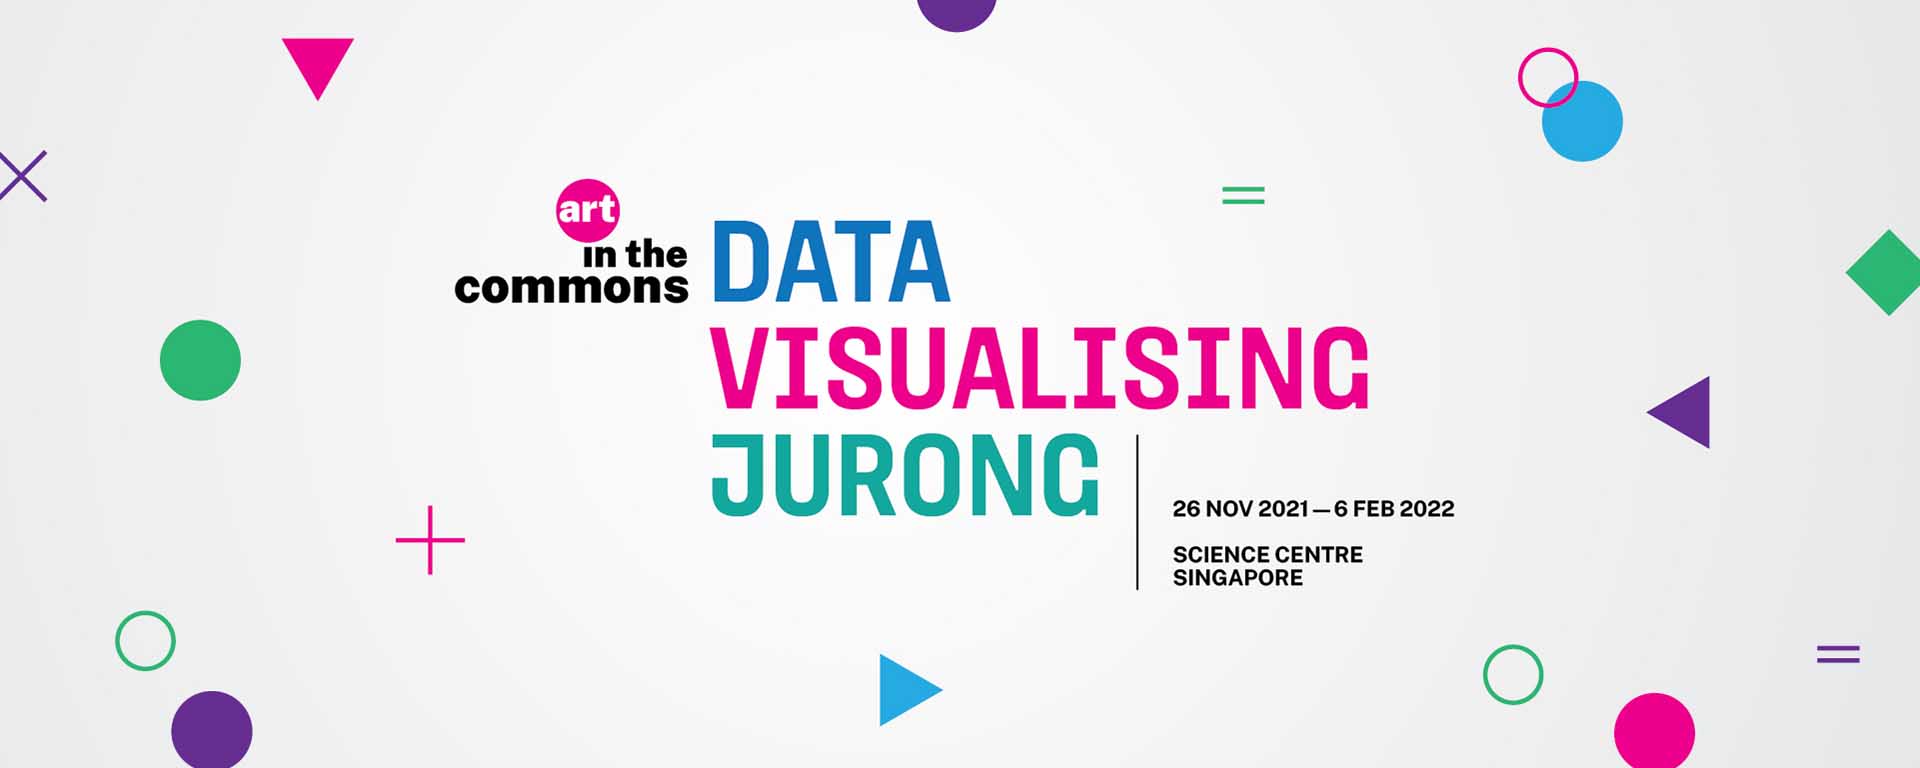 Art in the Commons: Data Visualising Jurong